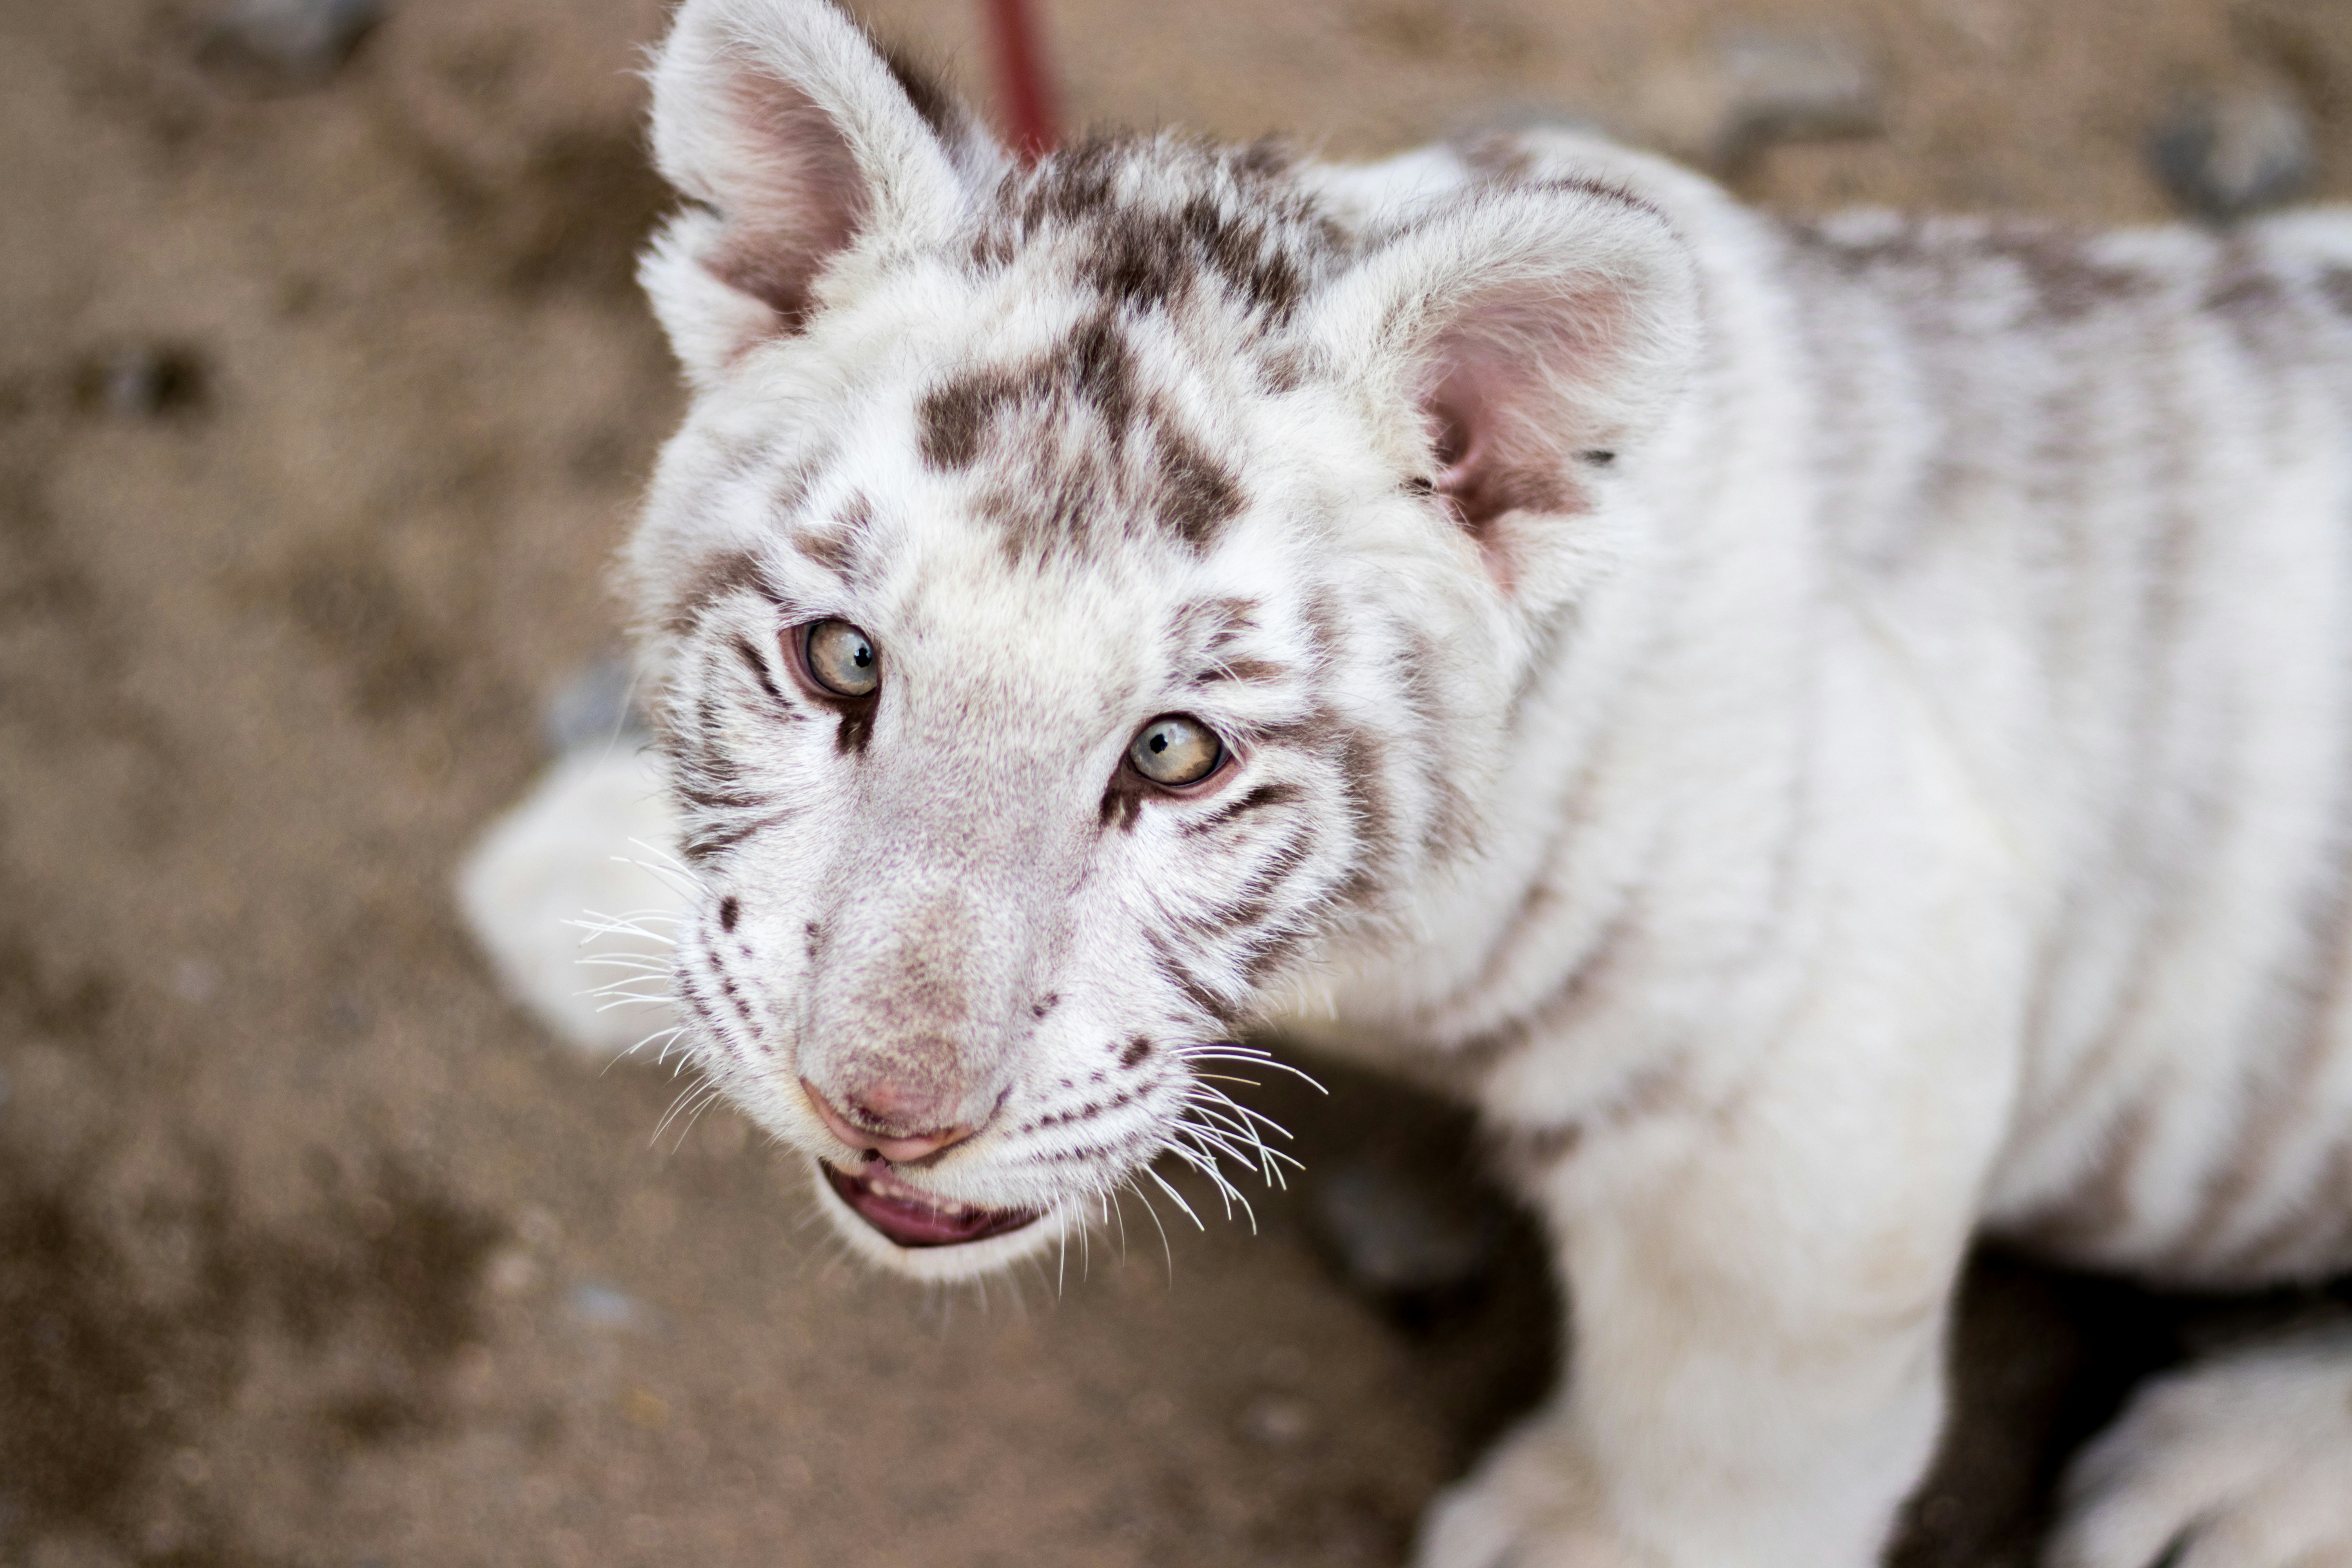 White tiger cub looking up